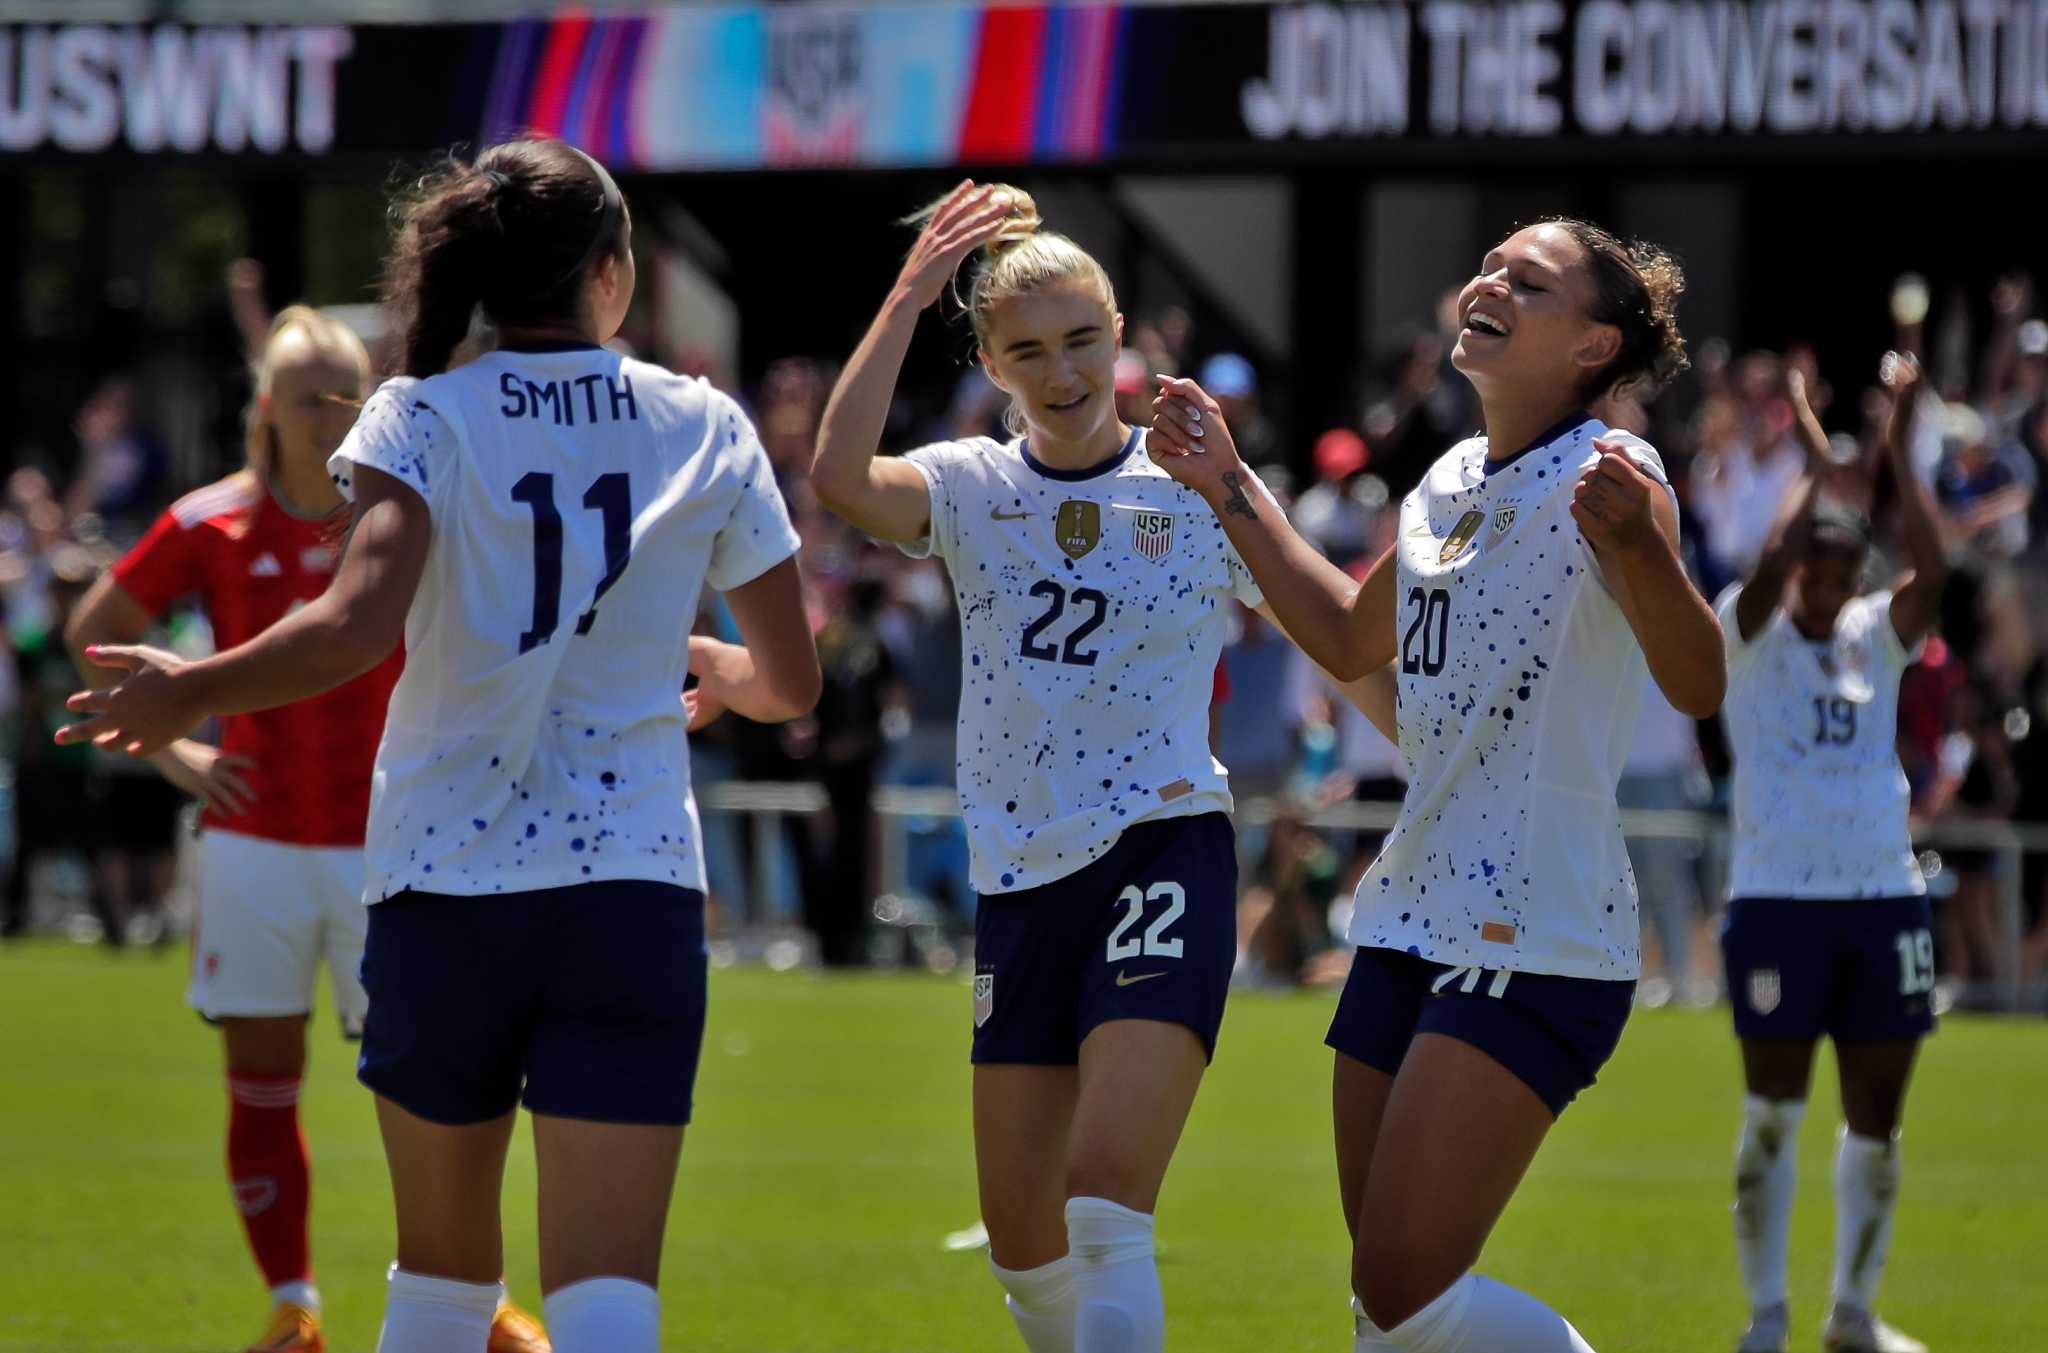 Trinity Rodman, daughter of an NBA legend, shines for USWNT before team  departs for Women's World Cup